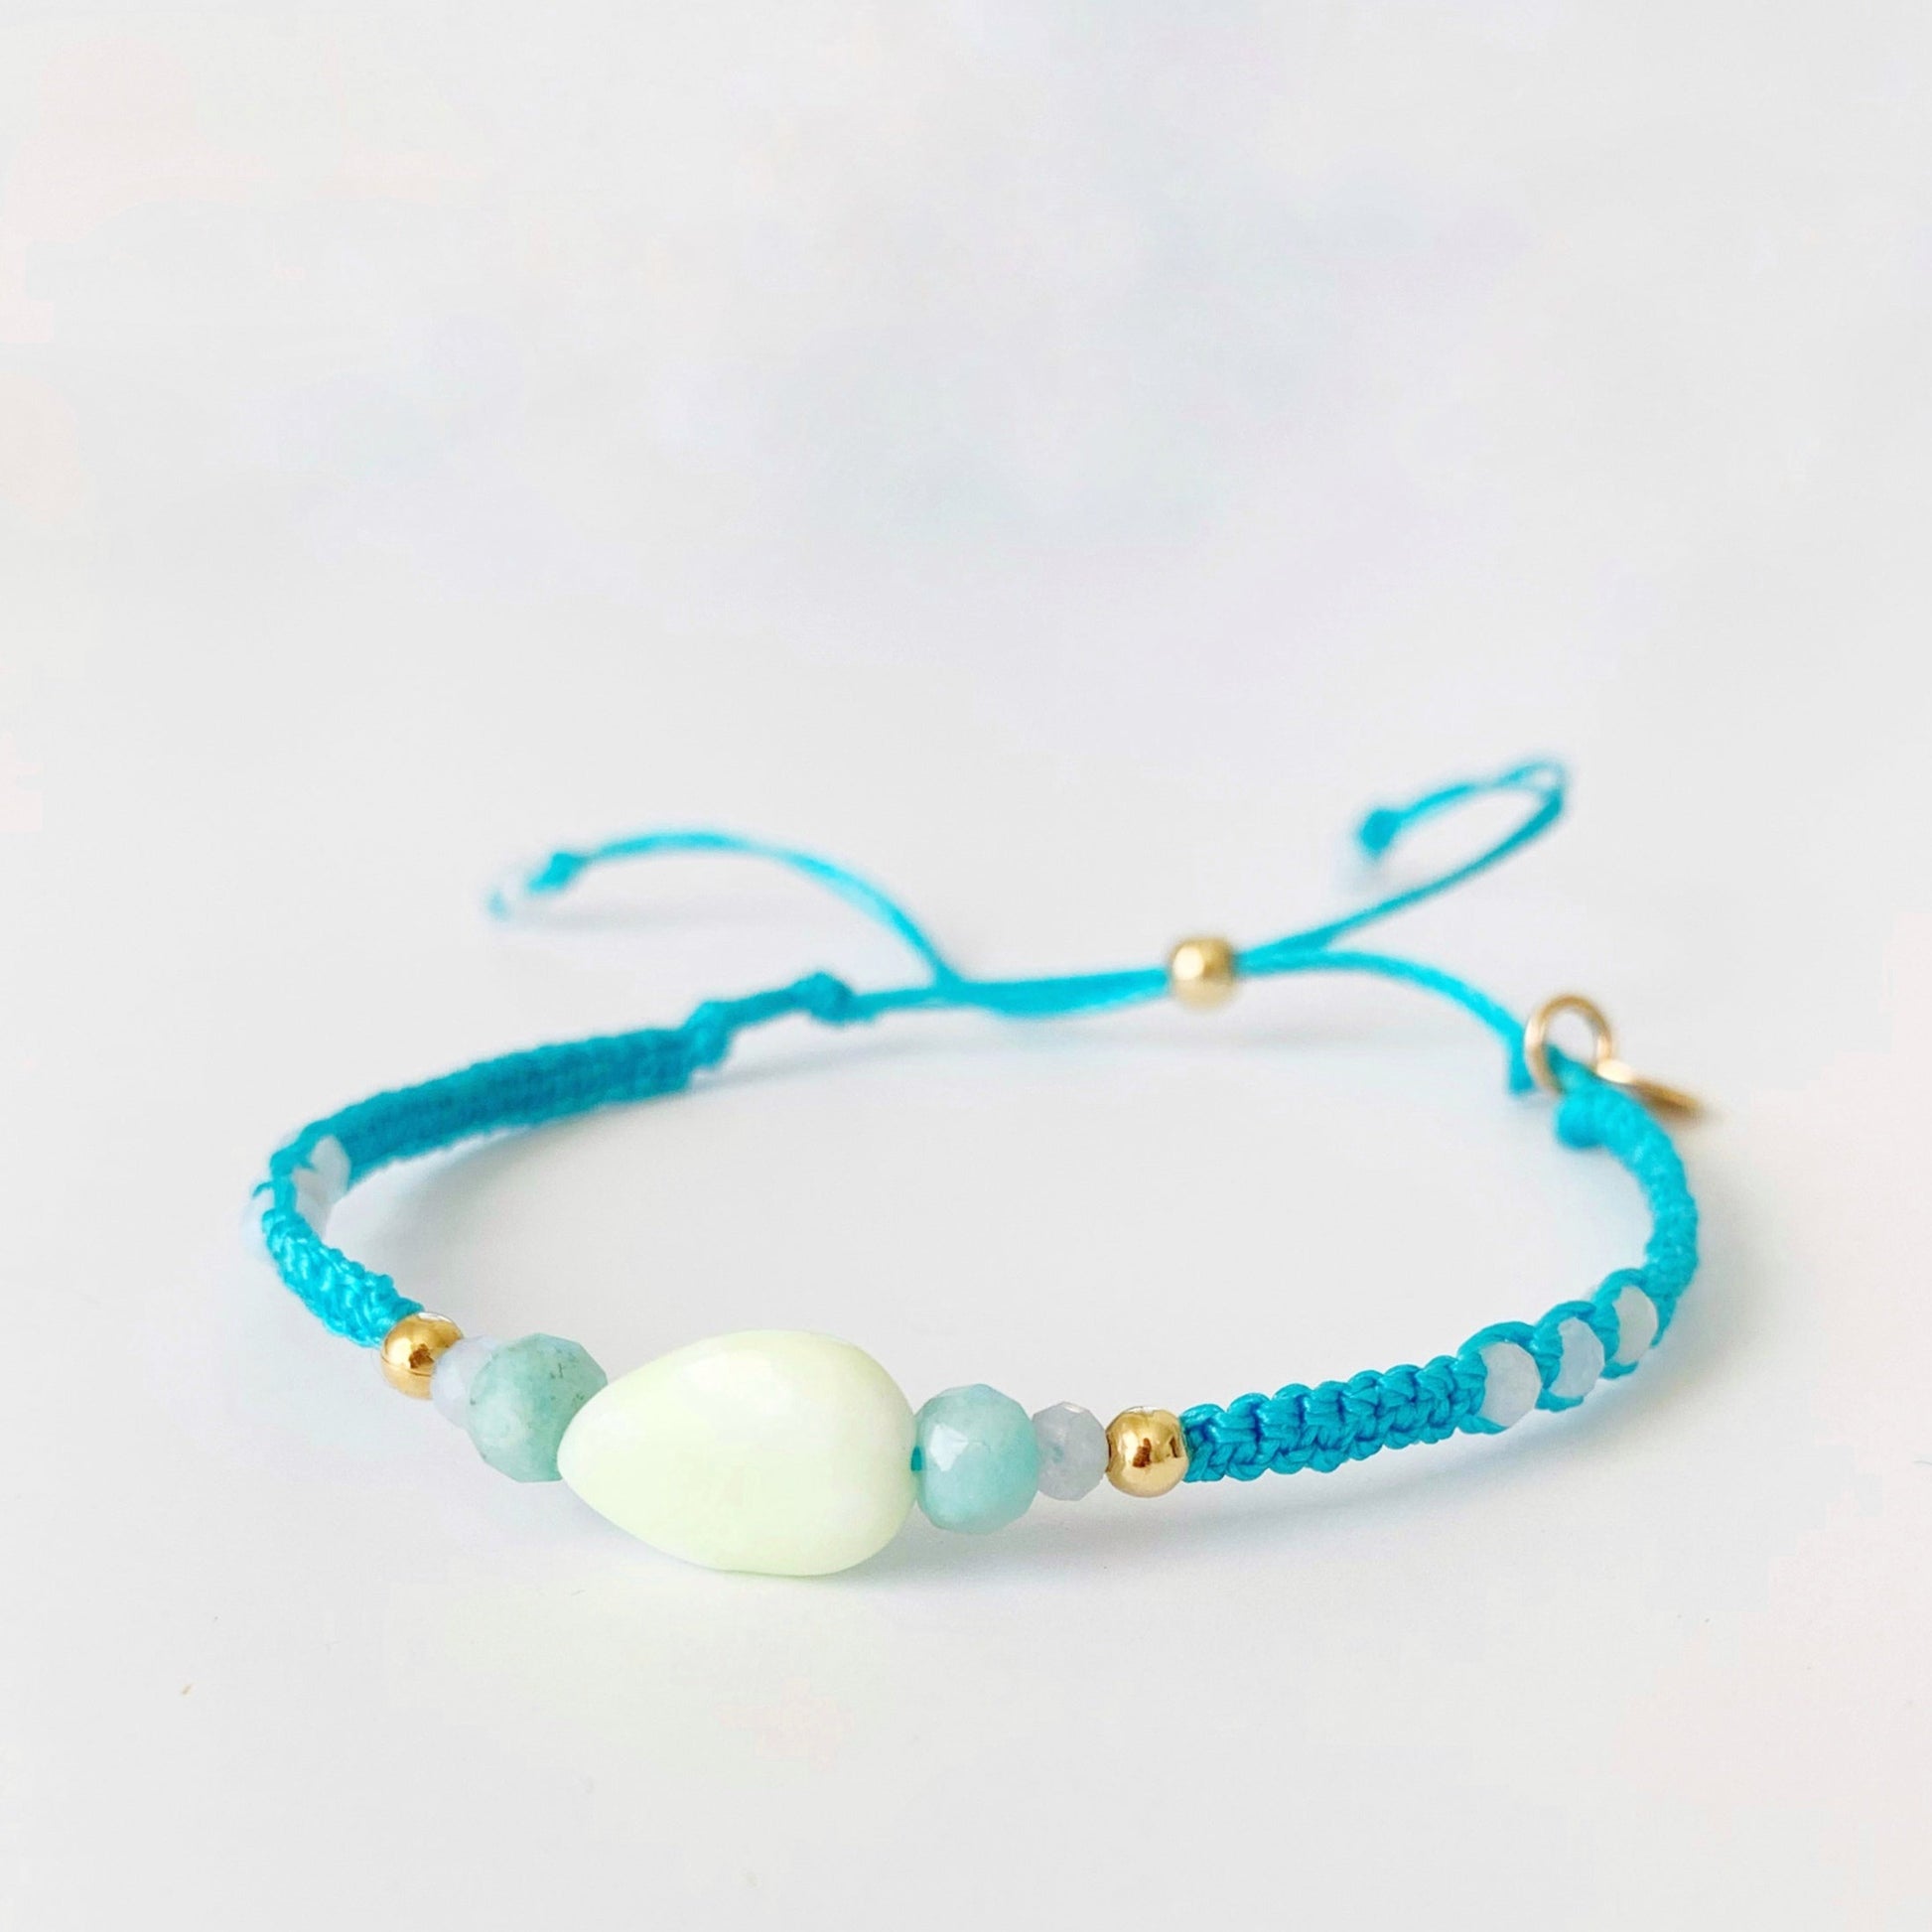 a semi side view of the blue crush captiva macrame bracelet photographed on a white surface